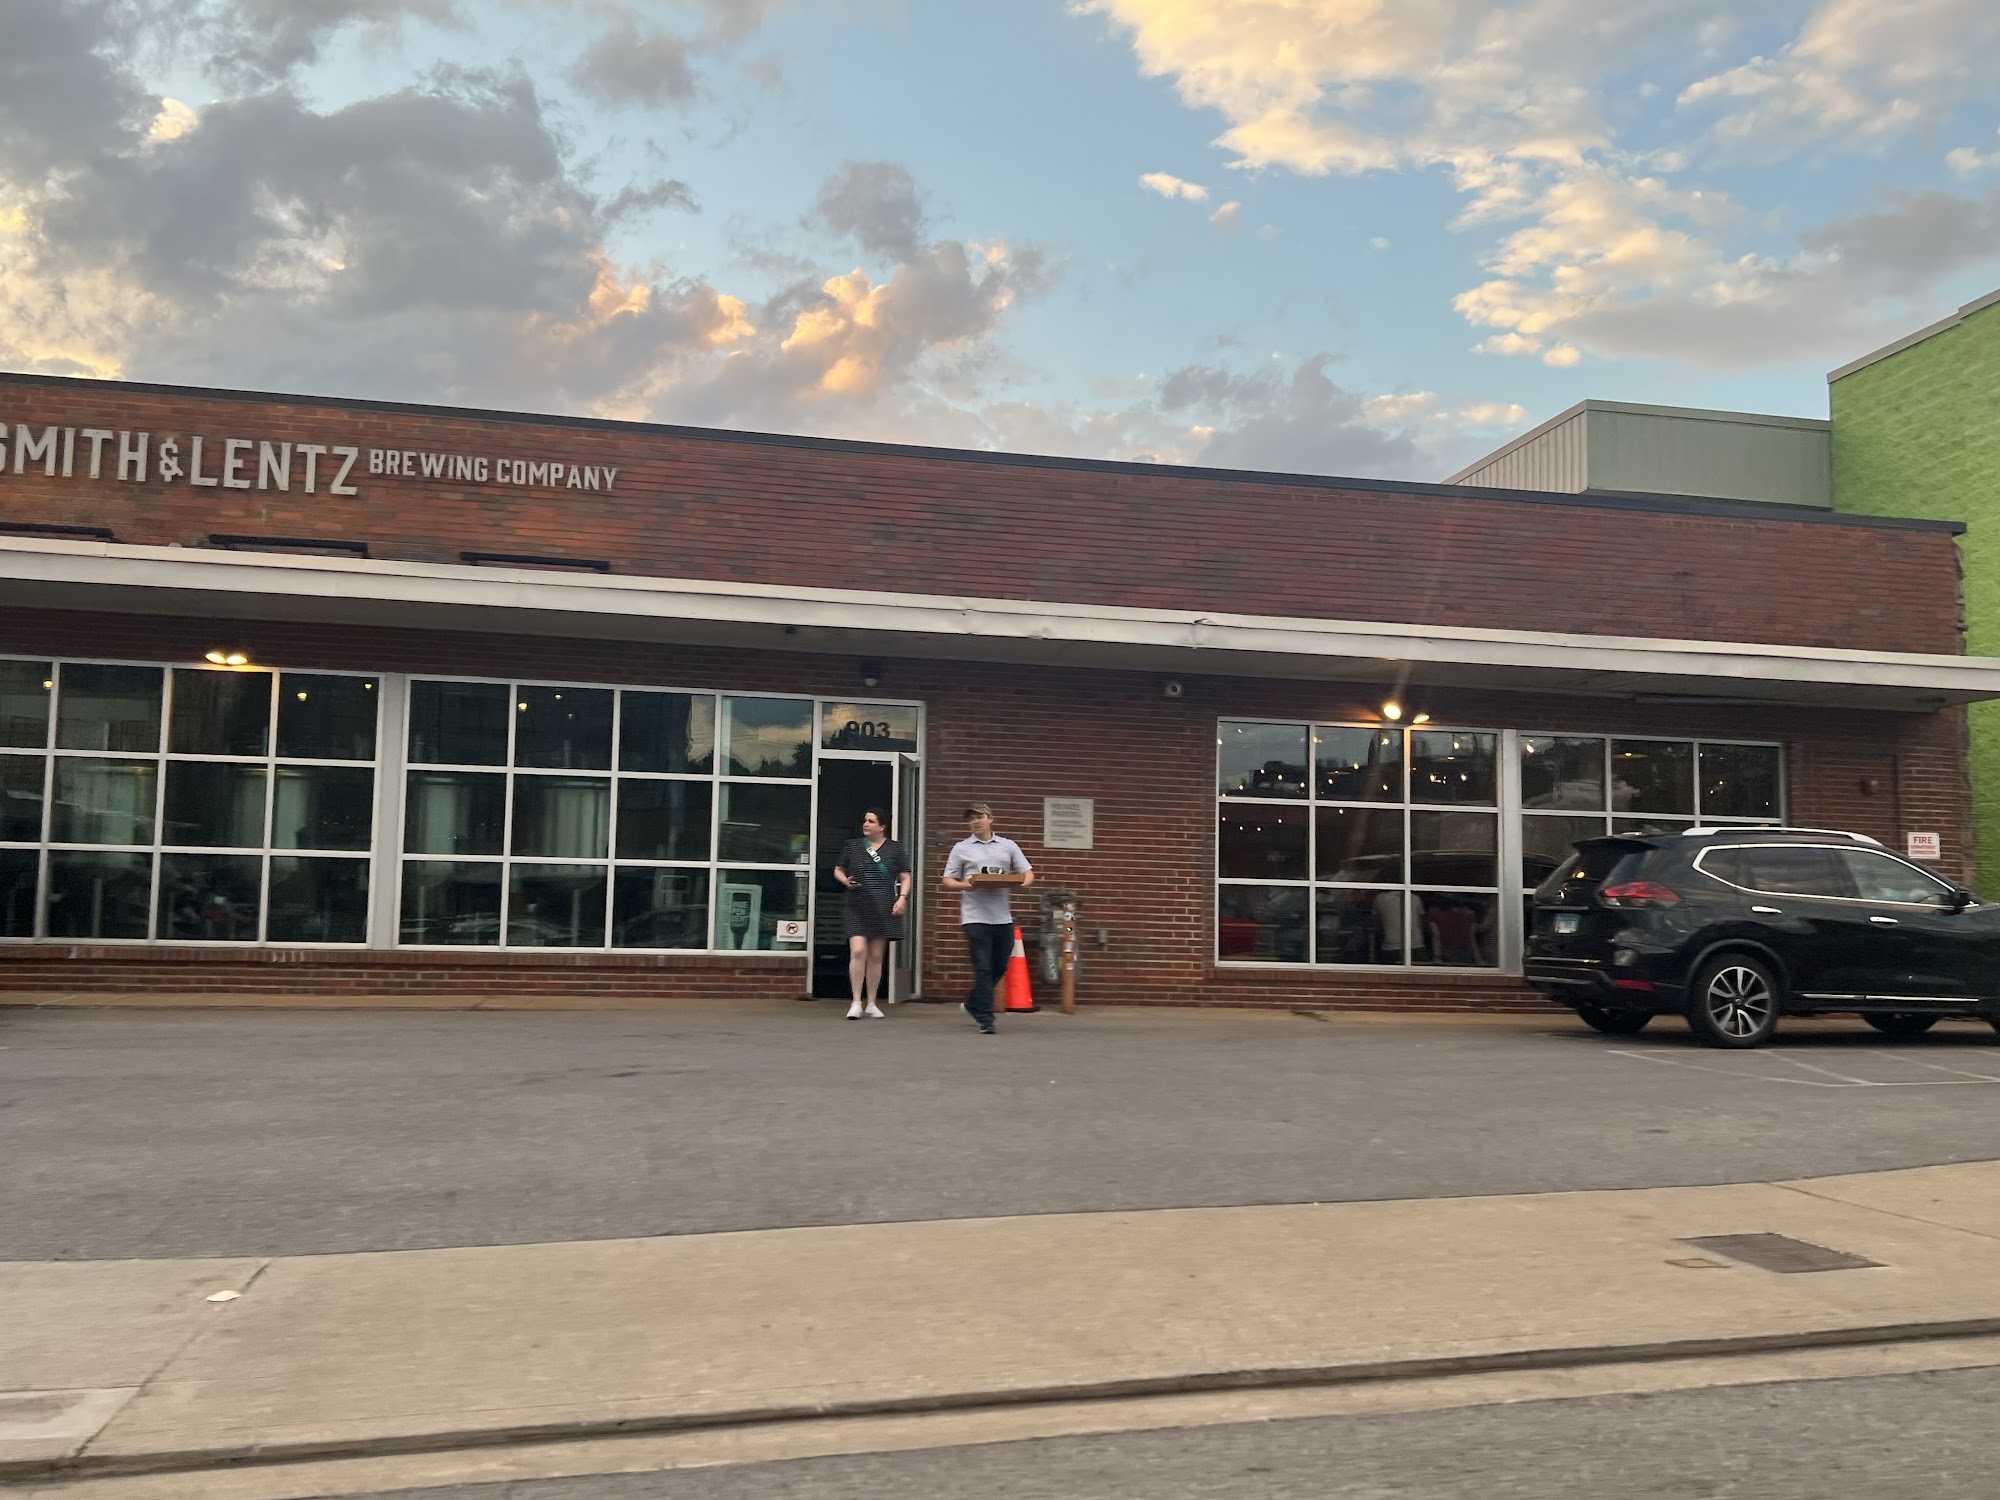 Smith & Lentz Brewing and Pizza